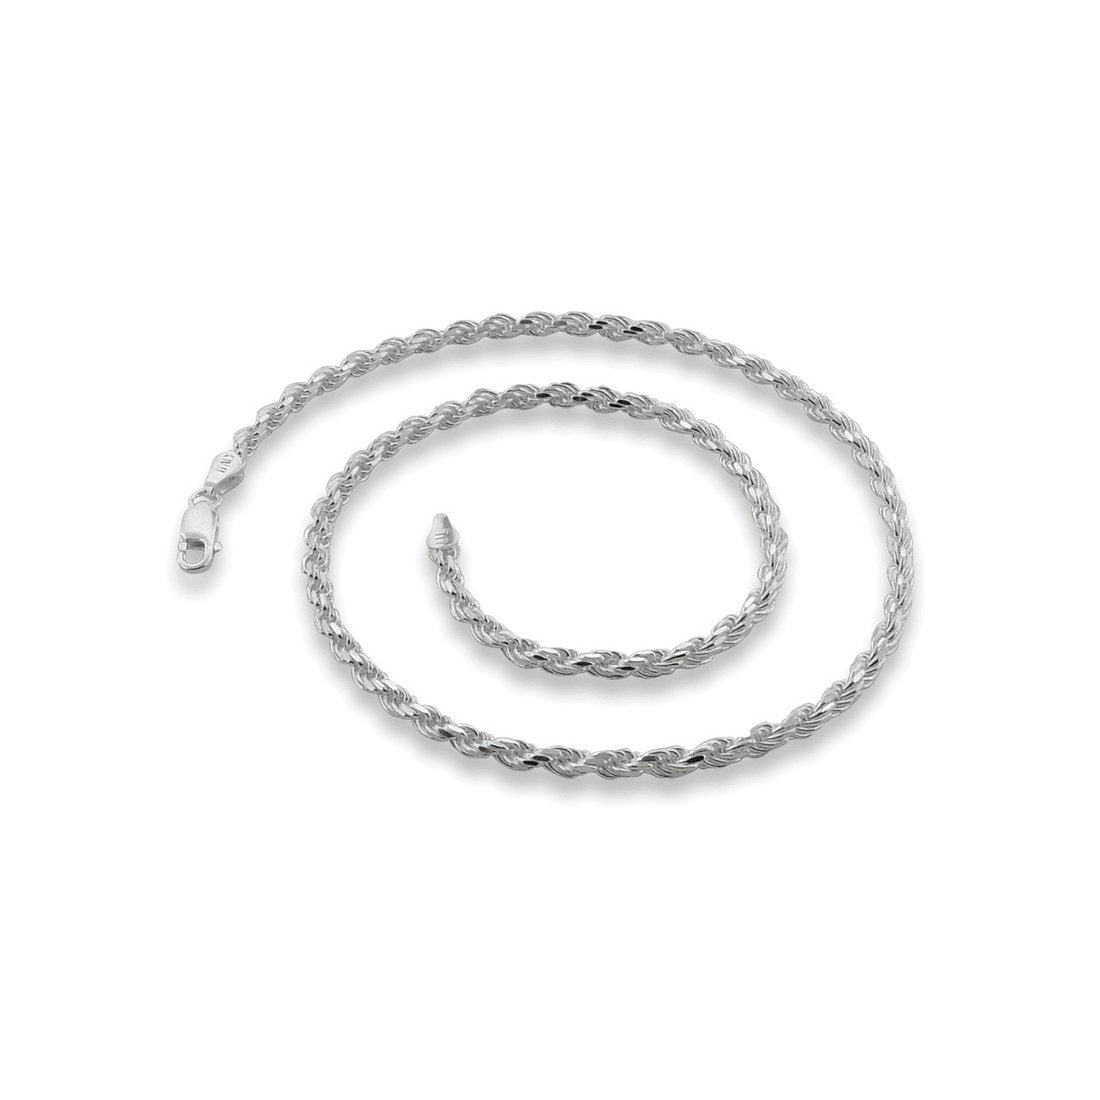 3.5MM 070 Rhodium Plated Rope Chain .925 Sterling Silver Length "9-28" Inches